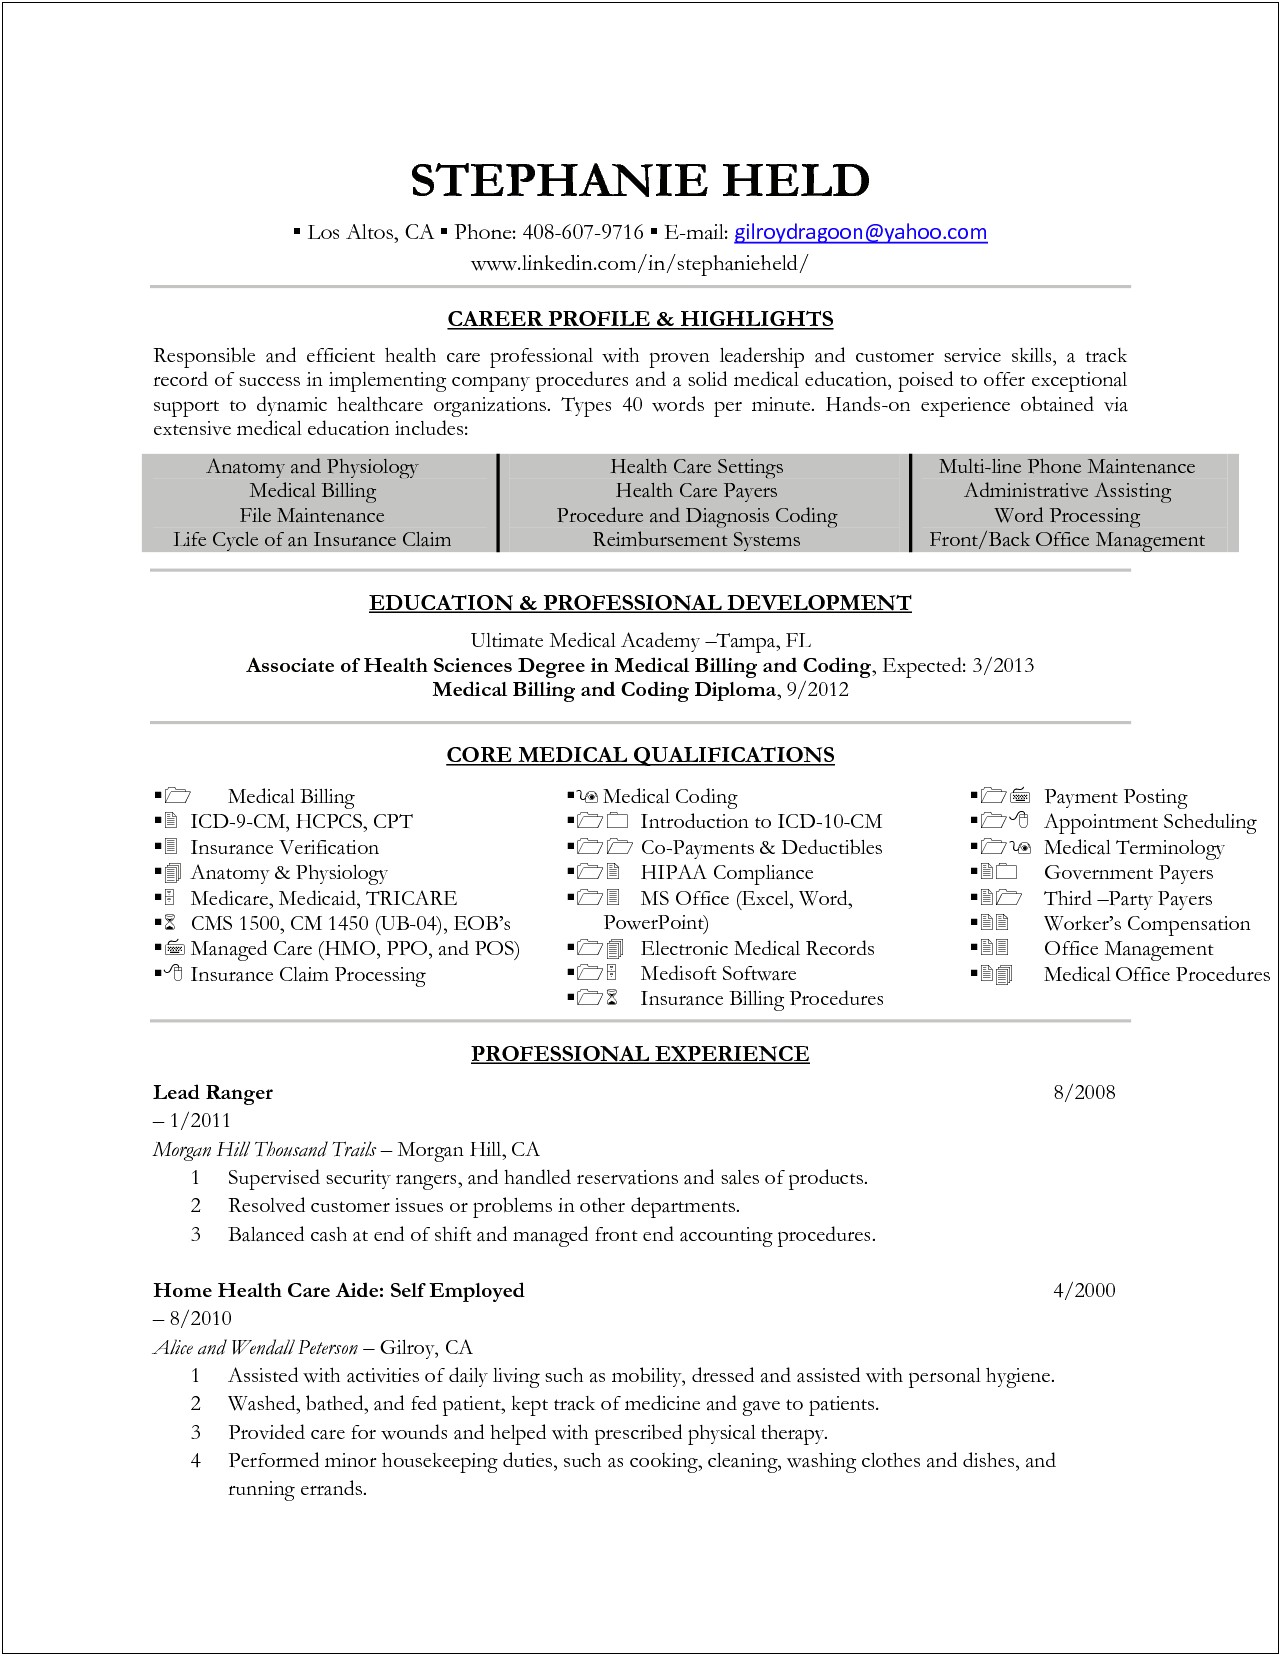 Technical Skills For Medical Billing And Coding Resume